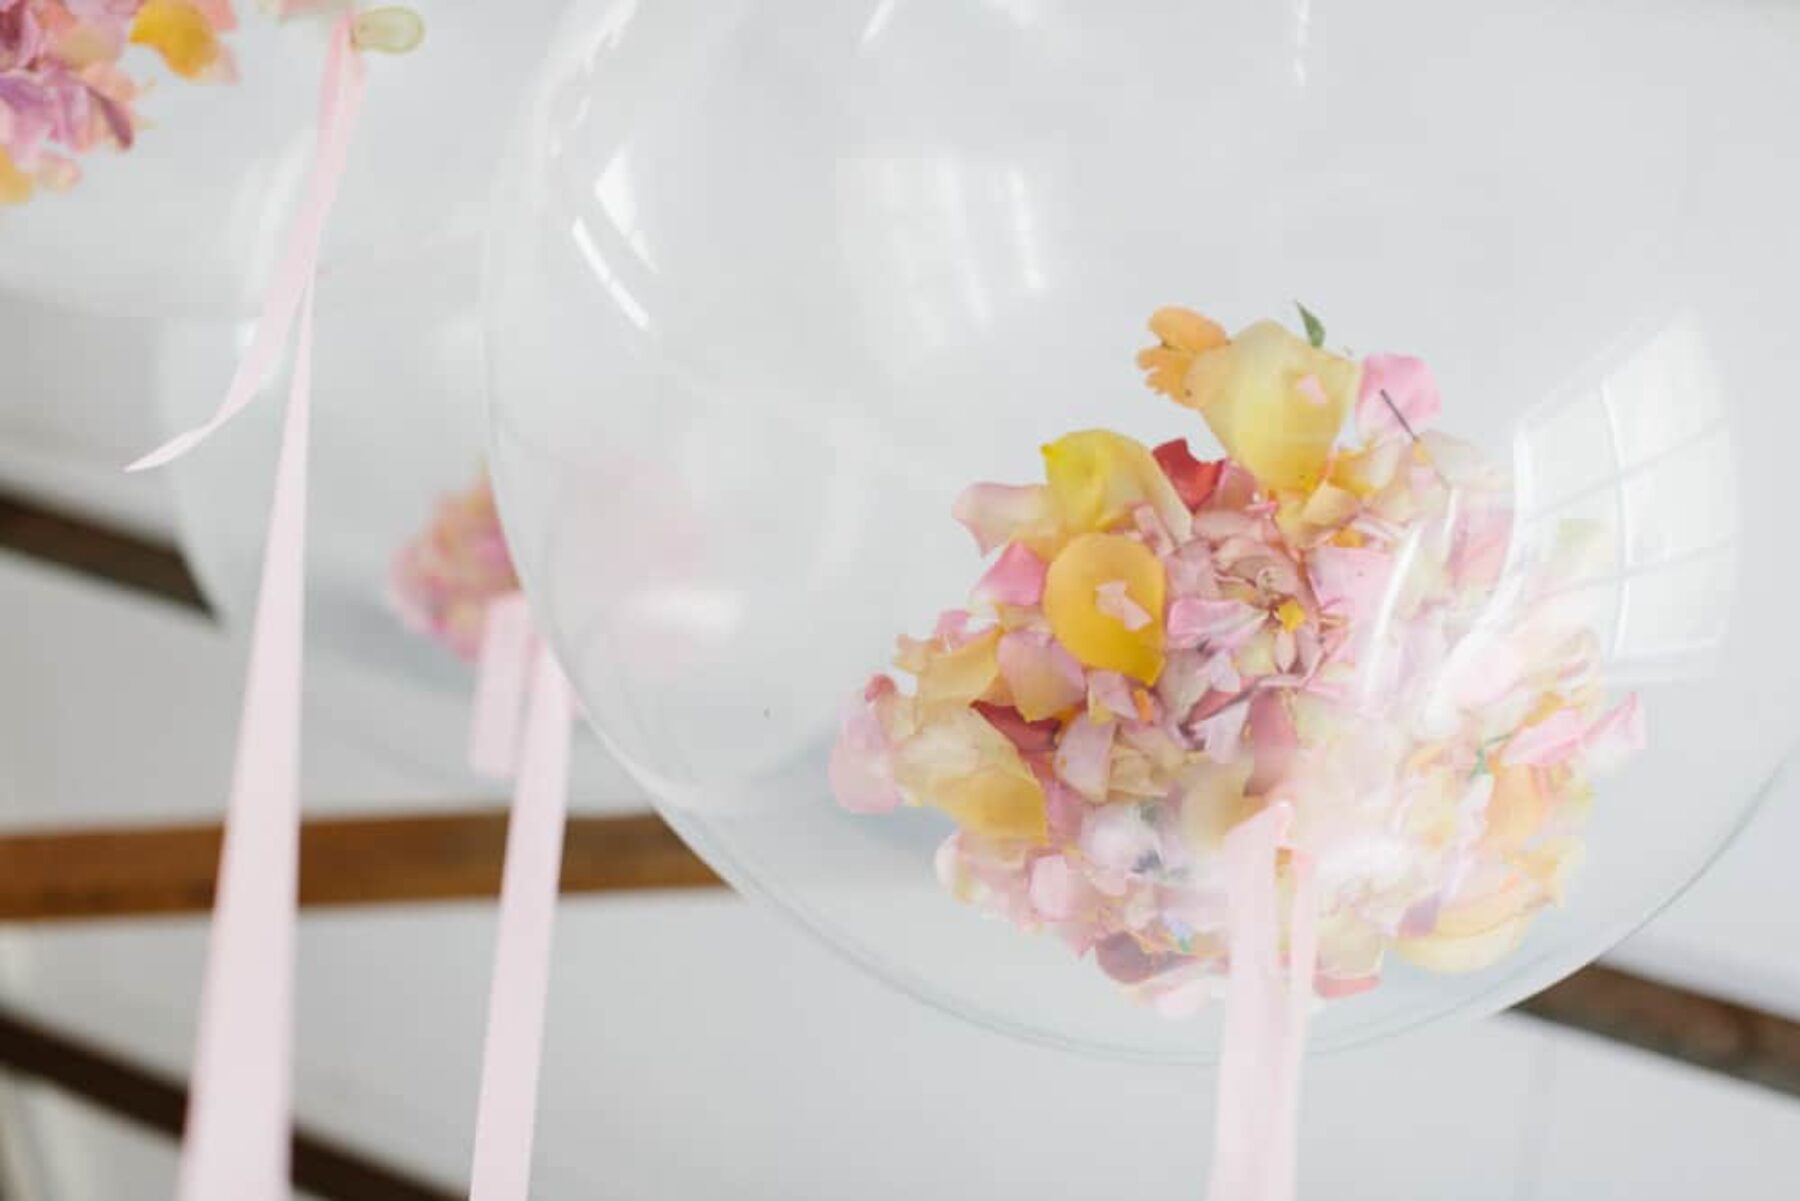 giant balloons filled with petal confetti